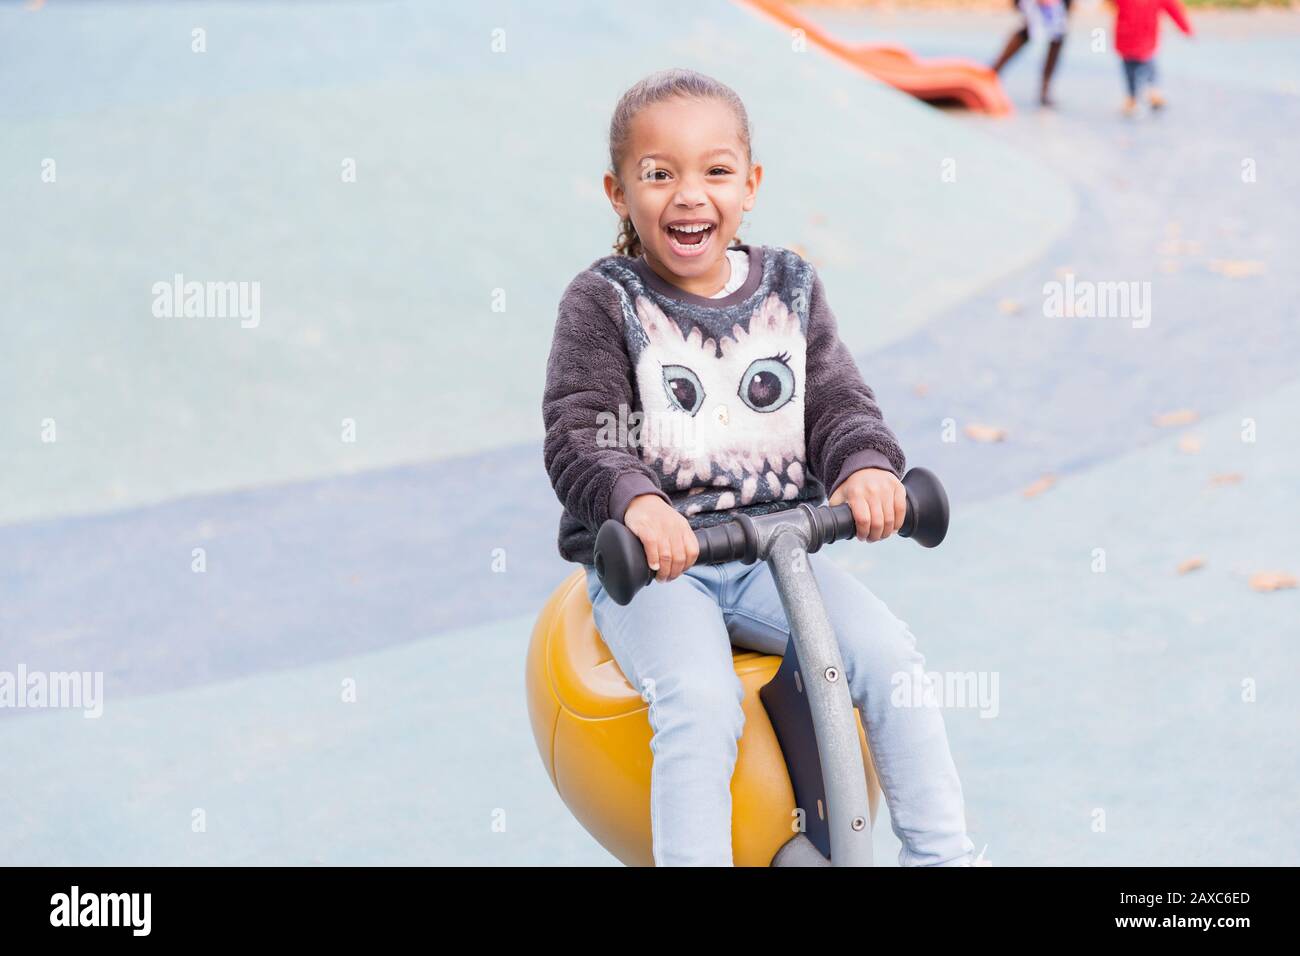 Portrait smiling, enthusiastic girl playing at playground Stock Photo